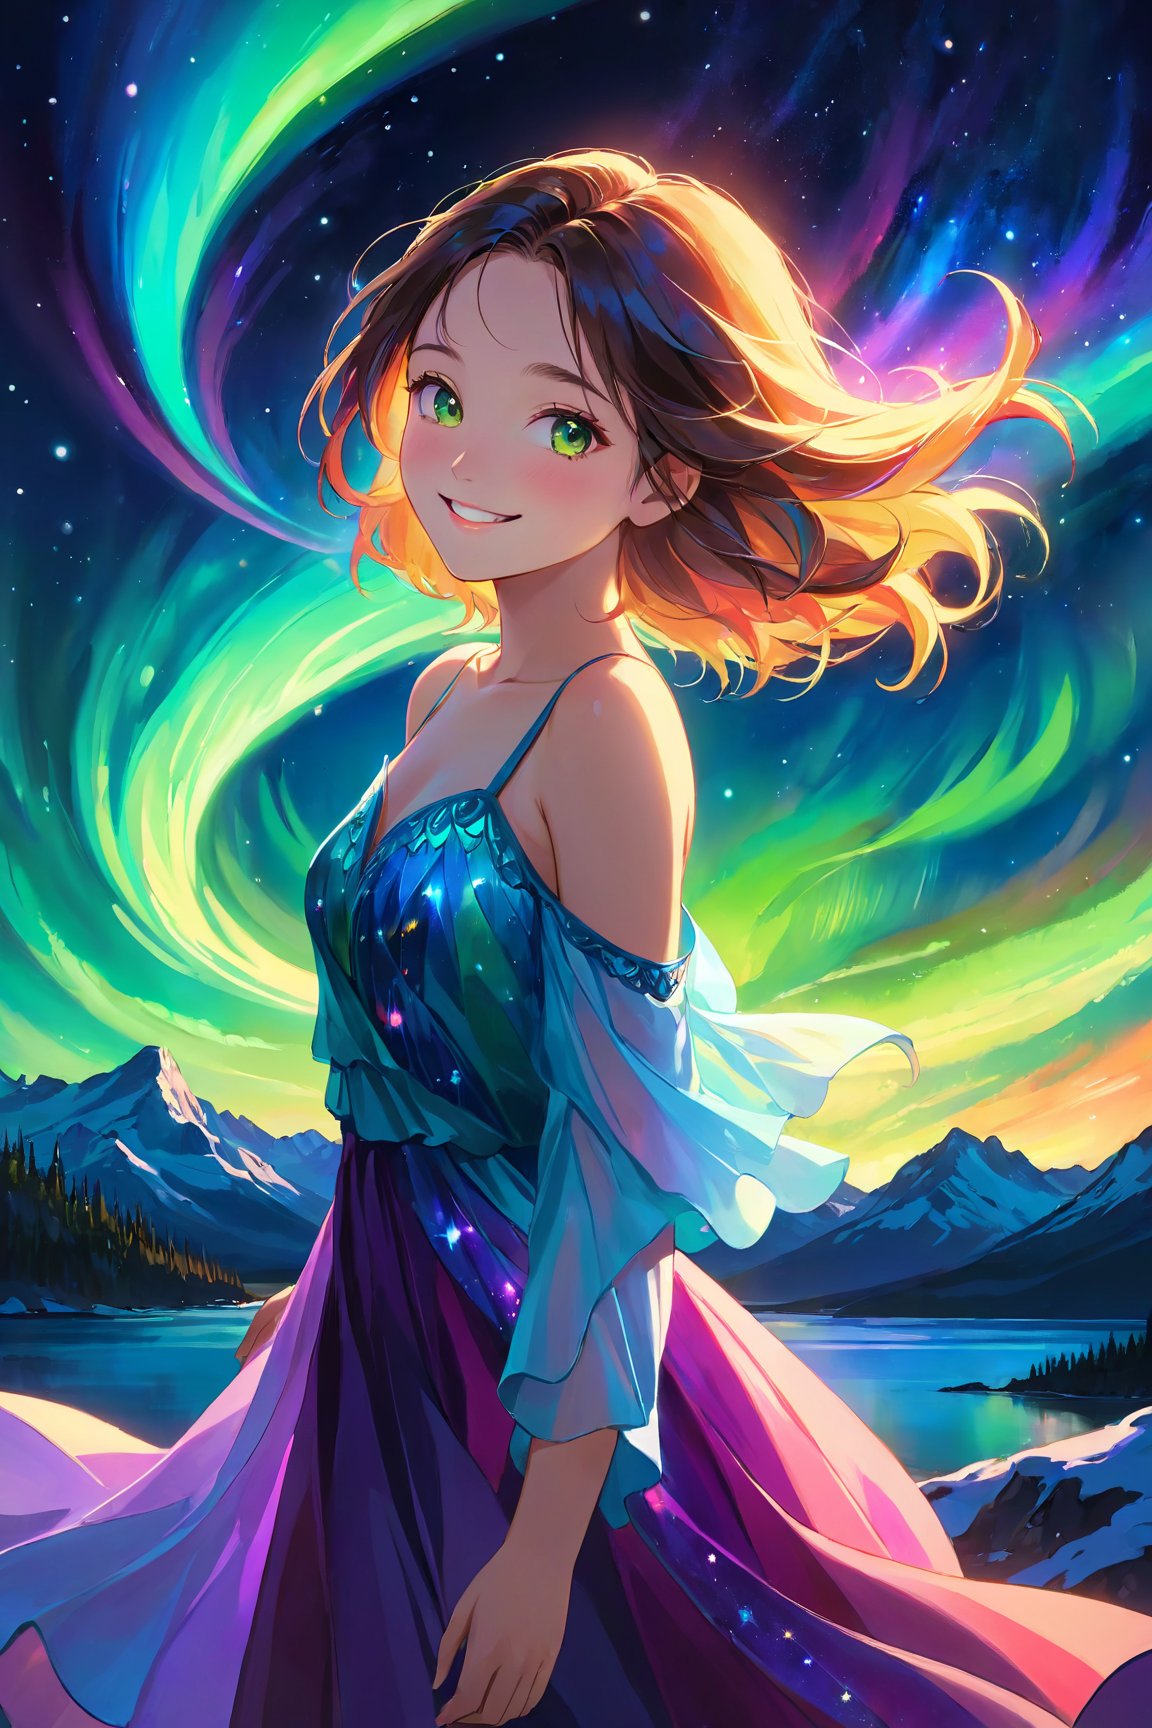 (best quality, 8K, highres, masterpiece), ultra-detailed, (super colorful, vibrant), enchanting image of a beautiful girl with a shoulder-length angled blunt-ends hairstyle. Her smile radiates warmth and positivity without any hint of arrogance. She stands gracefully under the mesmerizing glow of the aurora borealis in a vibrant night scene. The surrounding atmosphere is filled with a kaleidoscope of colors, creating a vibrant and ethereal dance of light. The girl embodies Nocturnal Grace, exuding Silent Luminescence amidst the Midnight Flutter of colors and the Whispering Silent beauty of the night. Every moment is an Iridescent Encounter with the Moonlit Shadow, celebrating a captivating and colorful display of artistry.